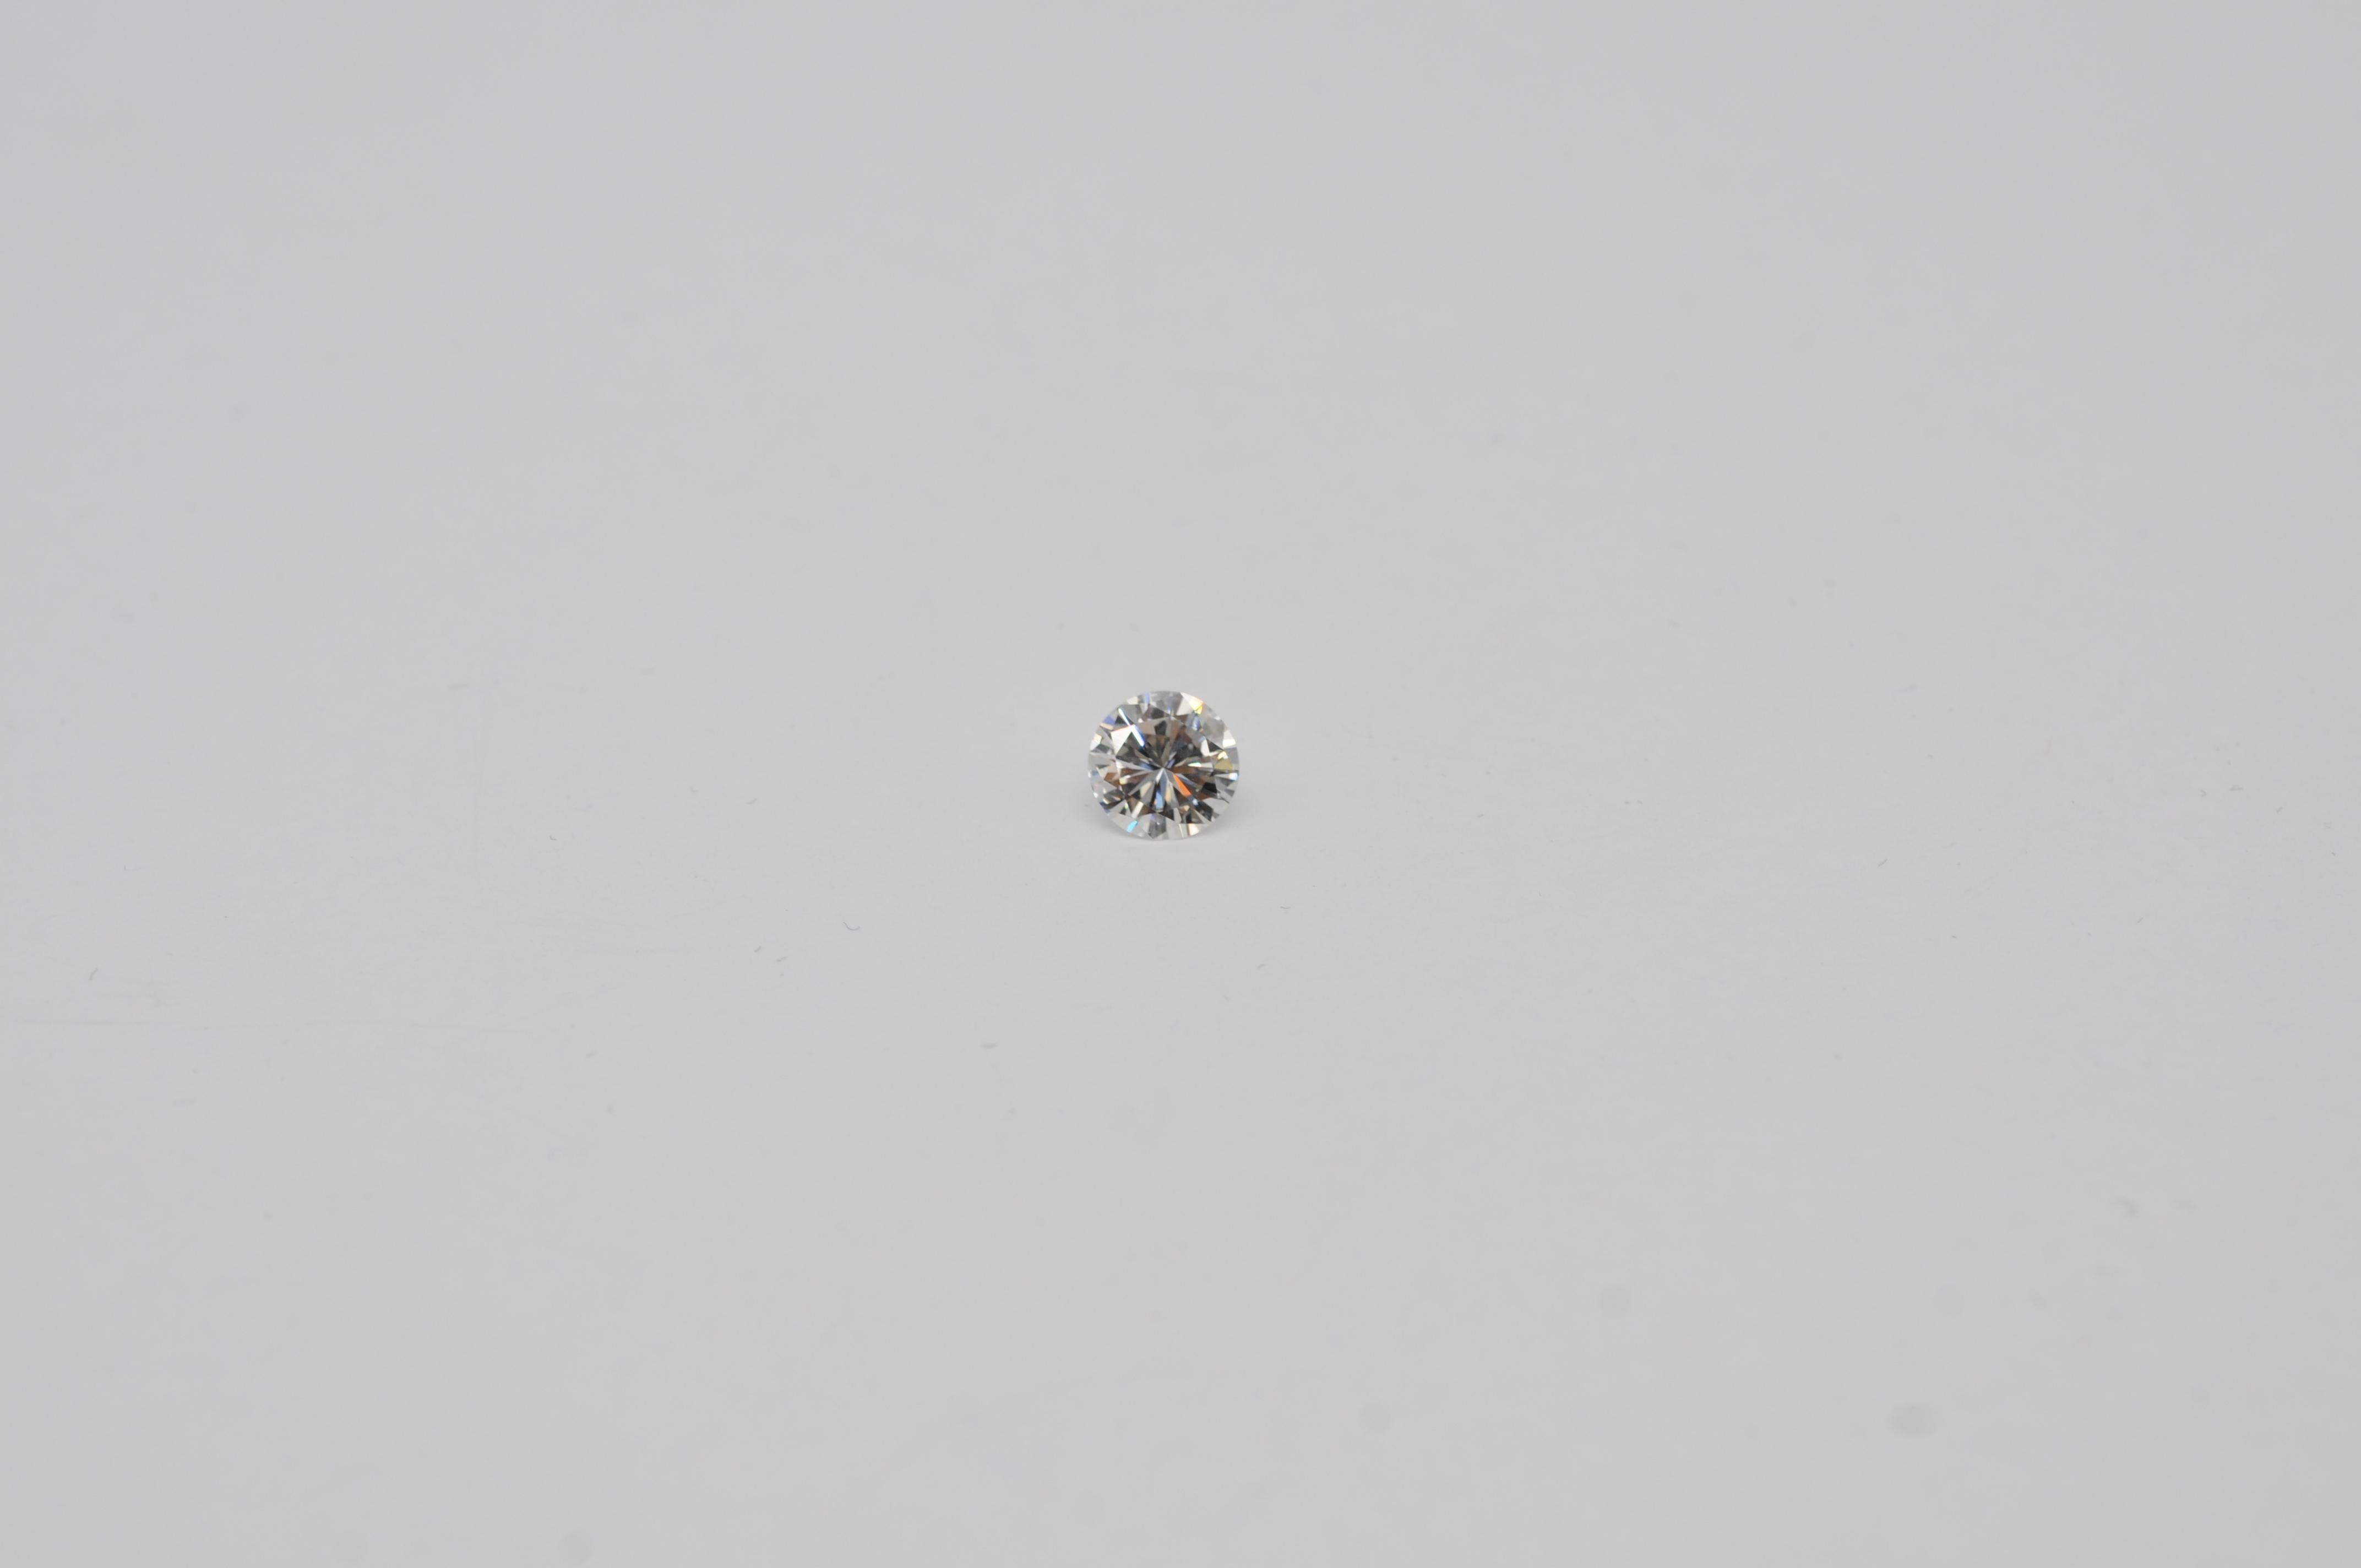  Diamond clarity:(IF) internally flawless color: top wesselton 1.06ct For Sale 2